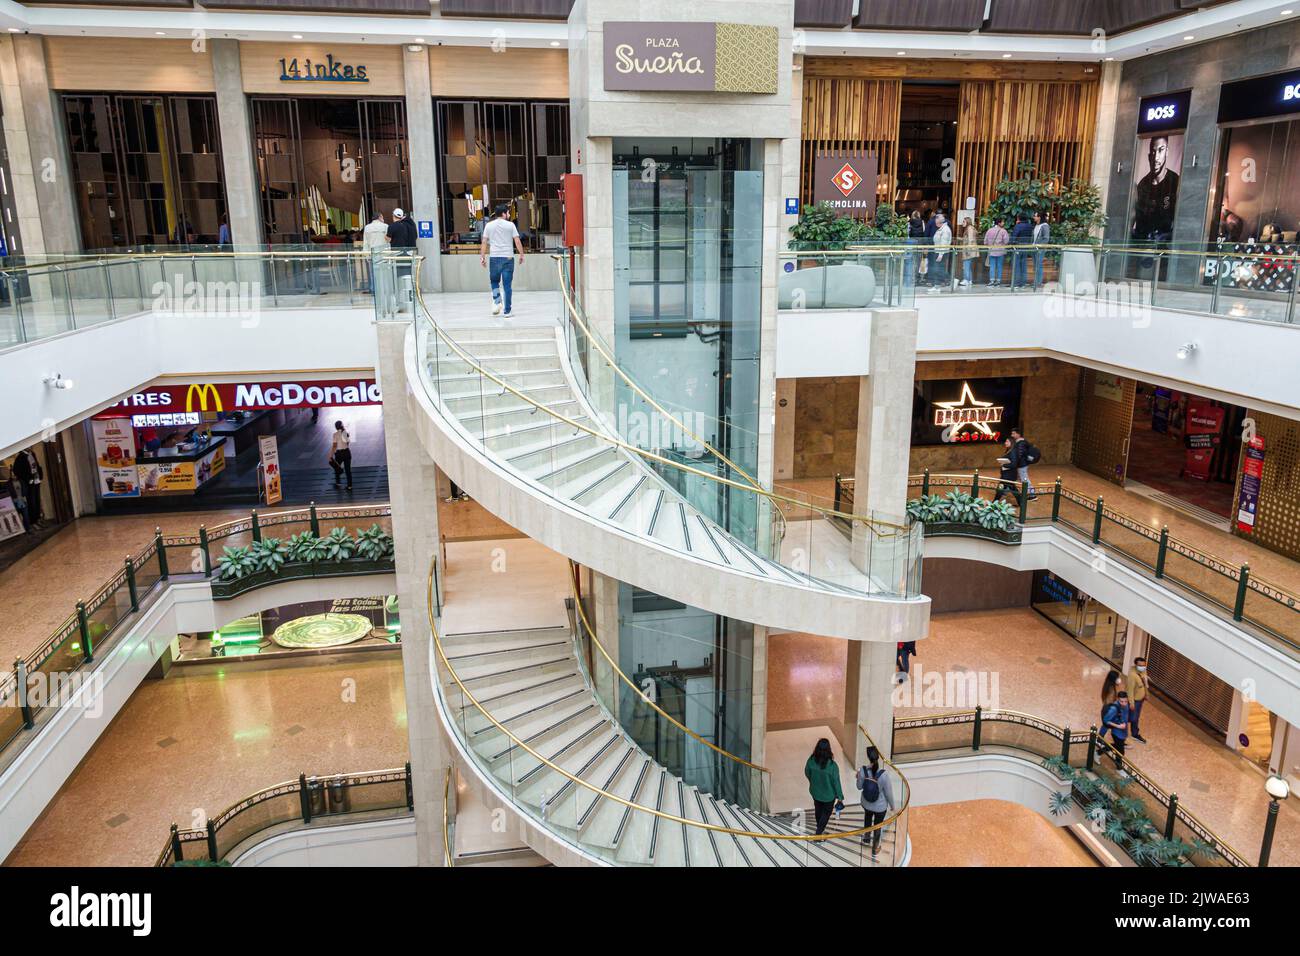 Bogota Colombia,Chapinero Centro comercial Andino Shopping Mall,store stores business businesses shop shops market markets marketplace selling buying Stock Photo